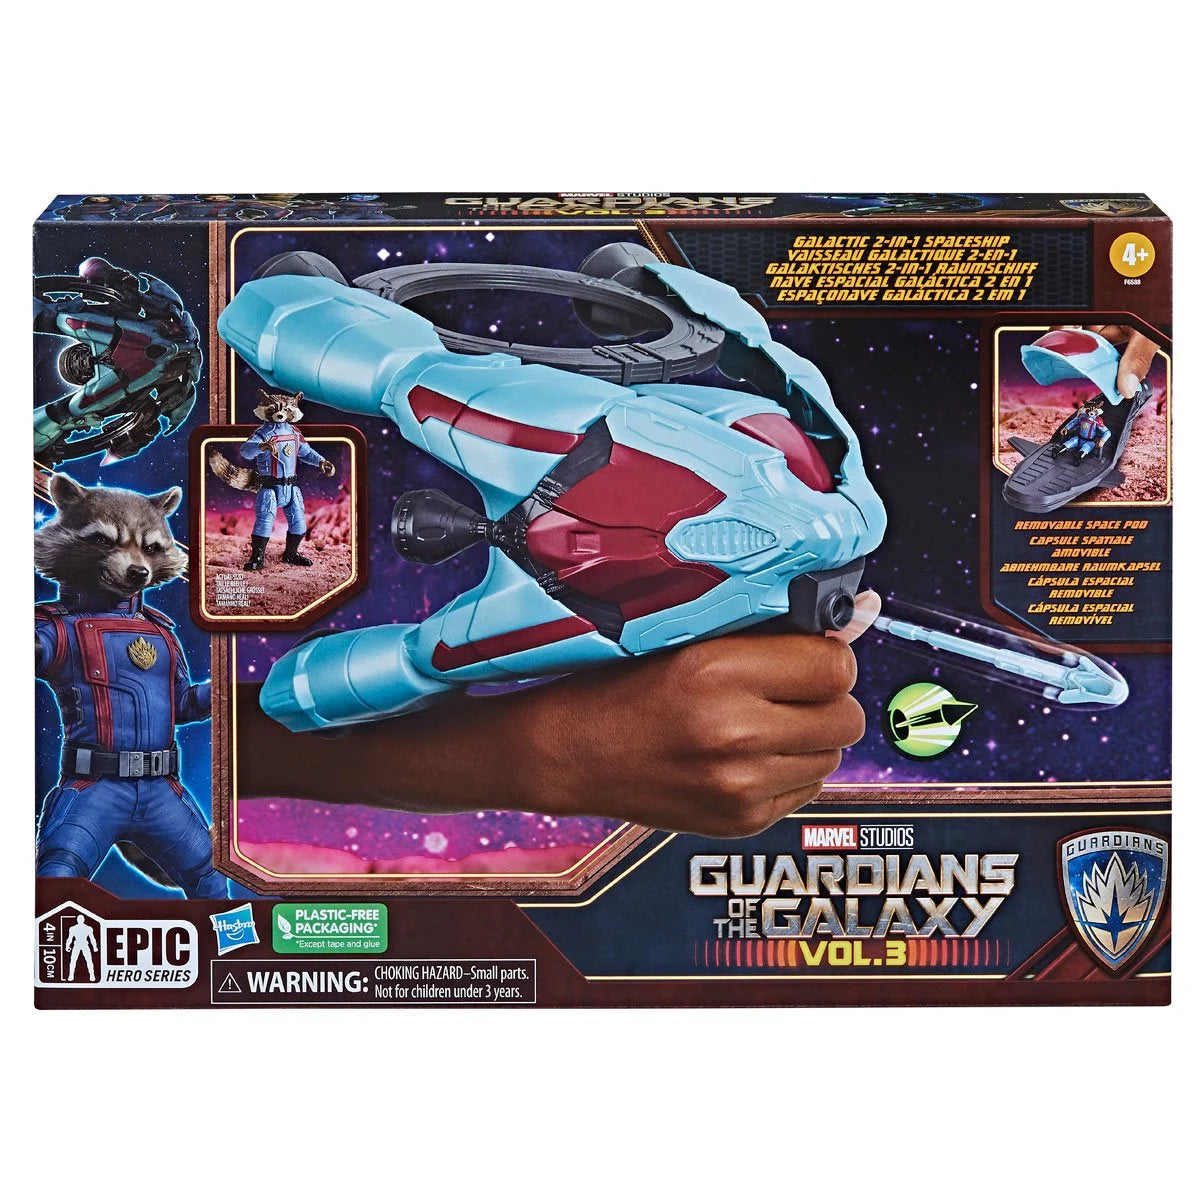 Marvel Guardians of The Galaxy Vol. 3 Galactic Spaceship, Marvel’s Rocket Action Figure with Vehicle and Blaster